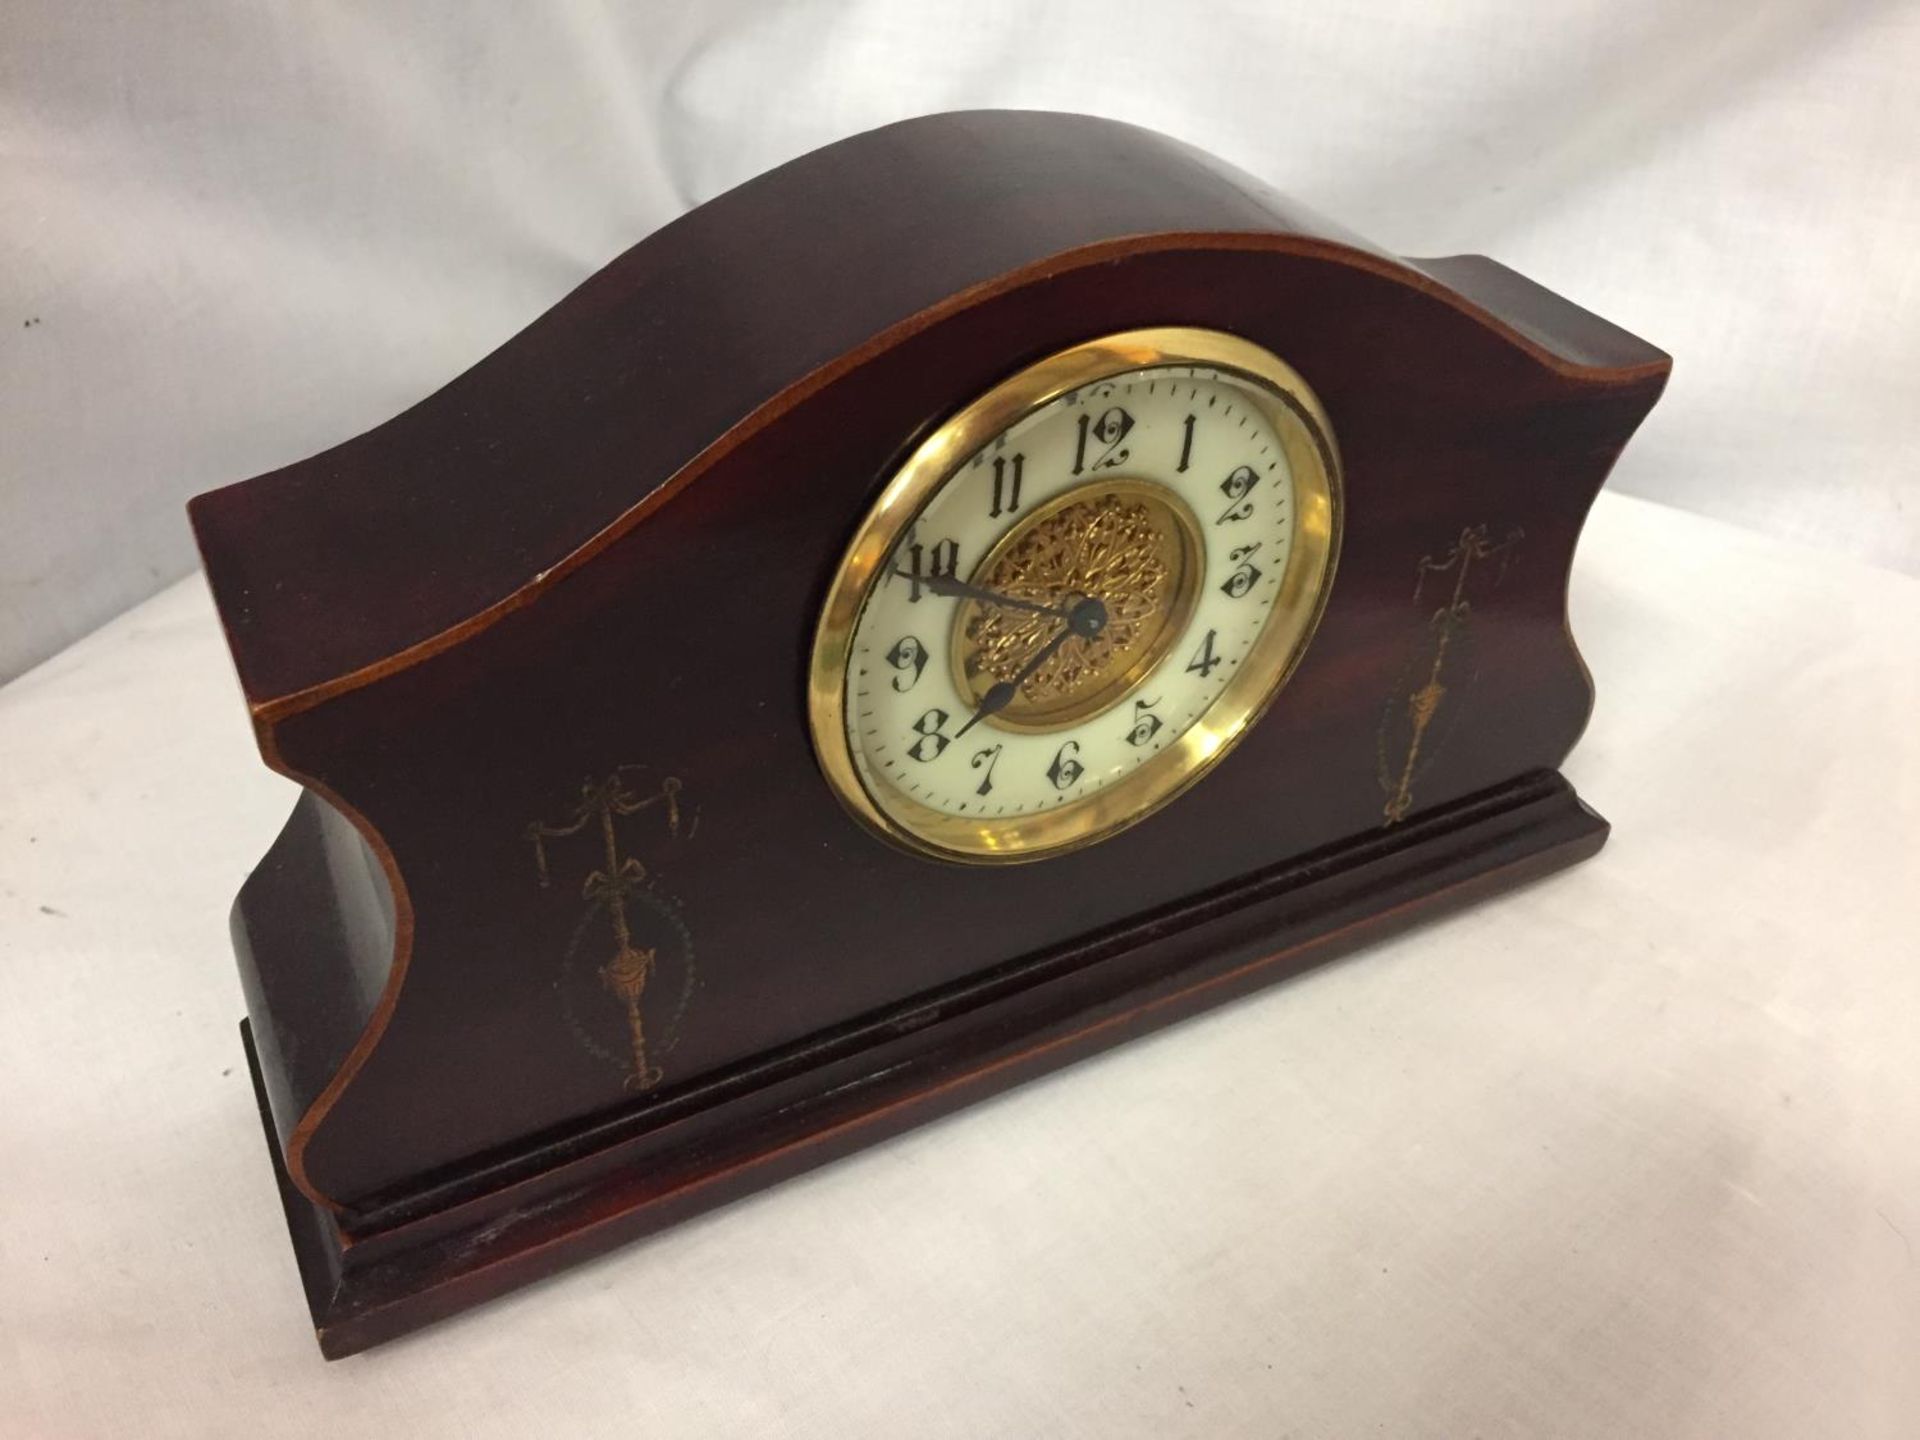 AN INLAID MAHOGANY MANTLE CLOCK WITH GILDED CENTRE FACE AND ENAMEL DIAL - Image 2 of 4